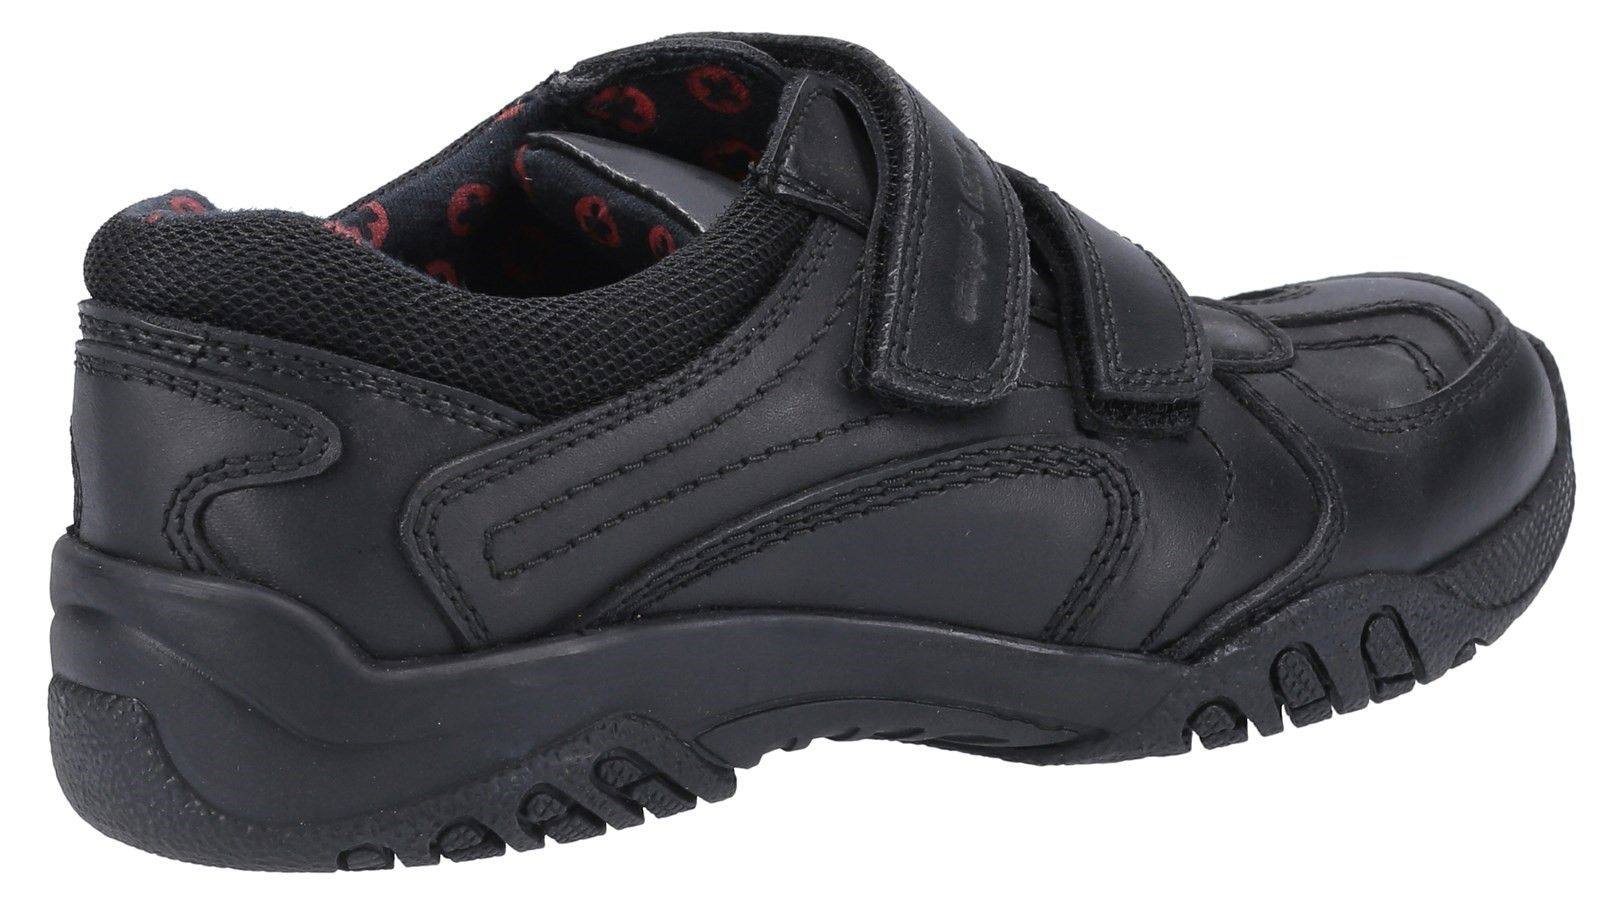 This smart black single fit leather boy's shoe is complete with a padded ankle collar for extra comfort. The toe is strengthened to ensure the shoe is hard wearing and robust.Full leather upper.